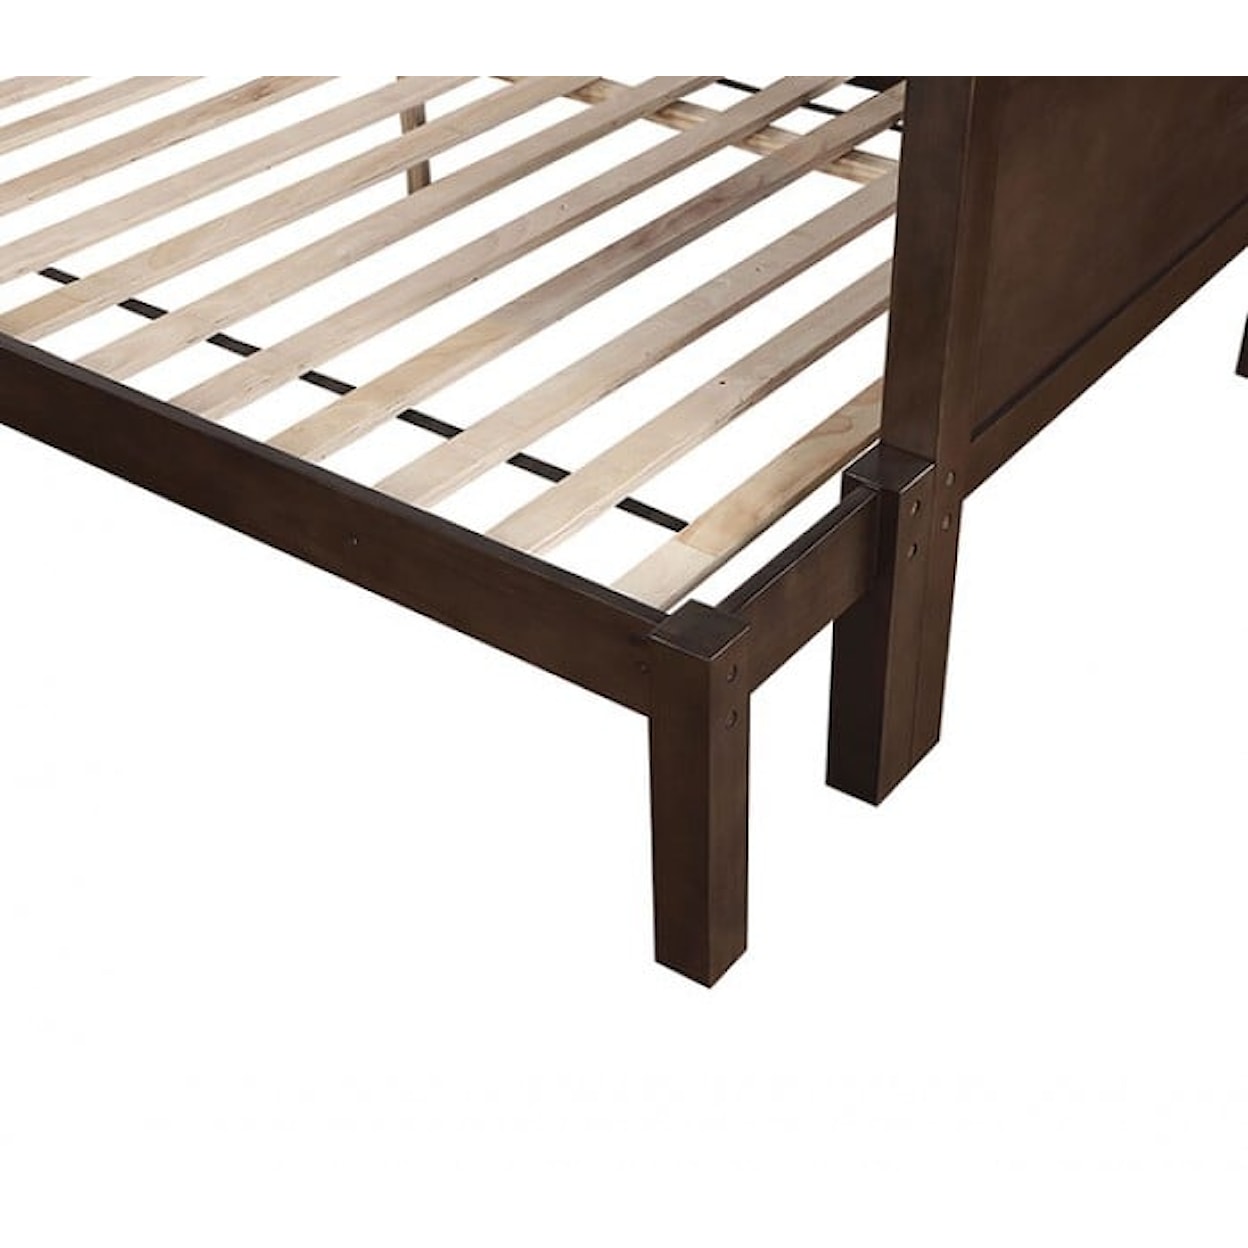 Furniture of America STAMOS Twin and Full Bunk Bed